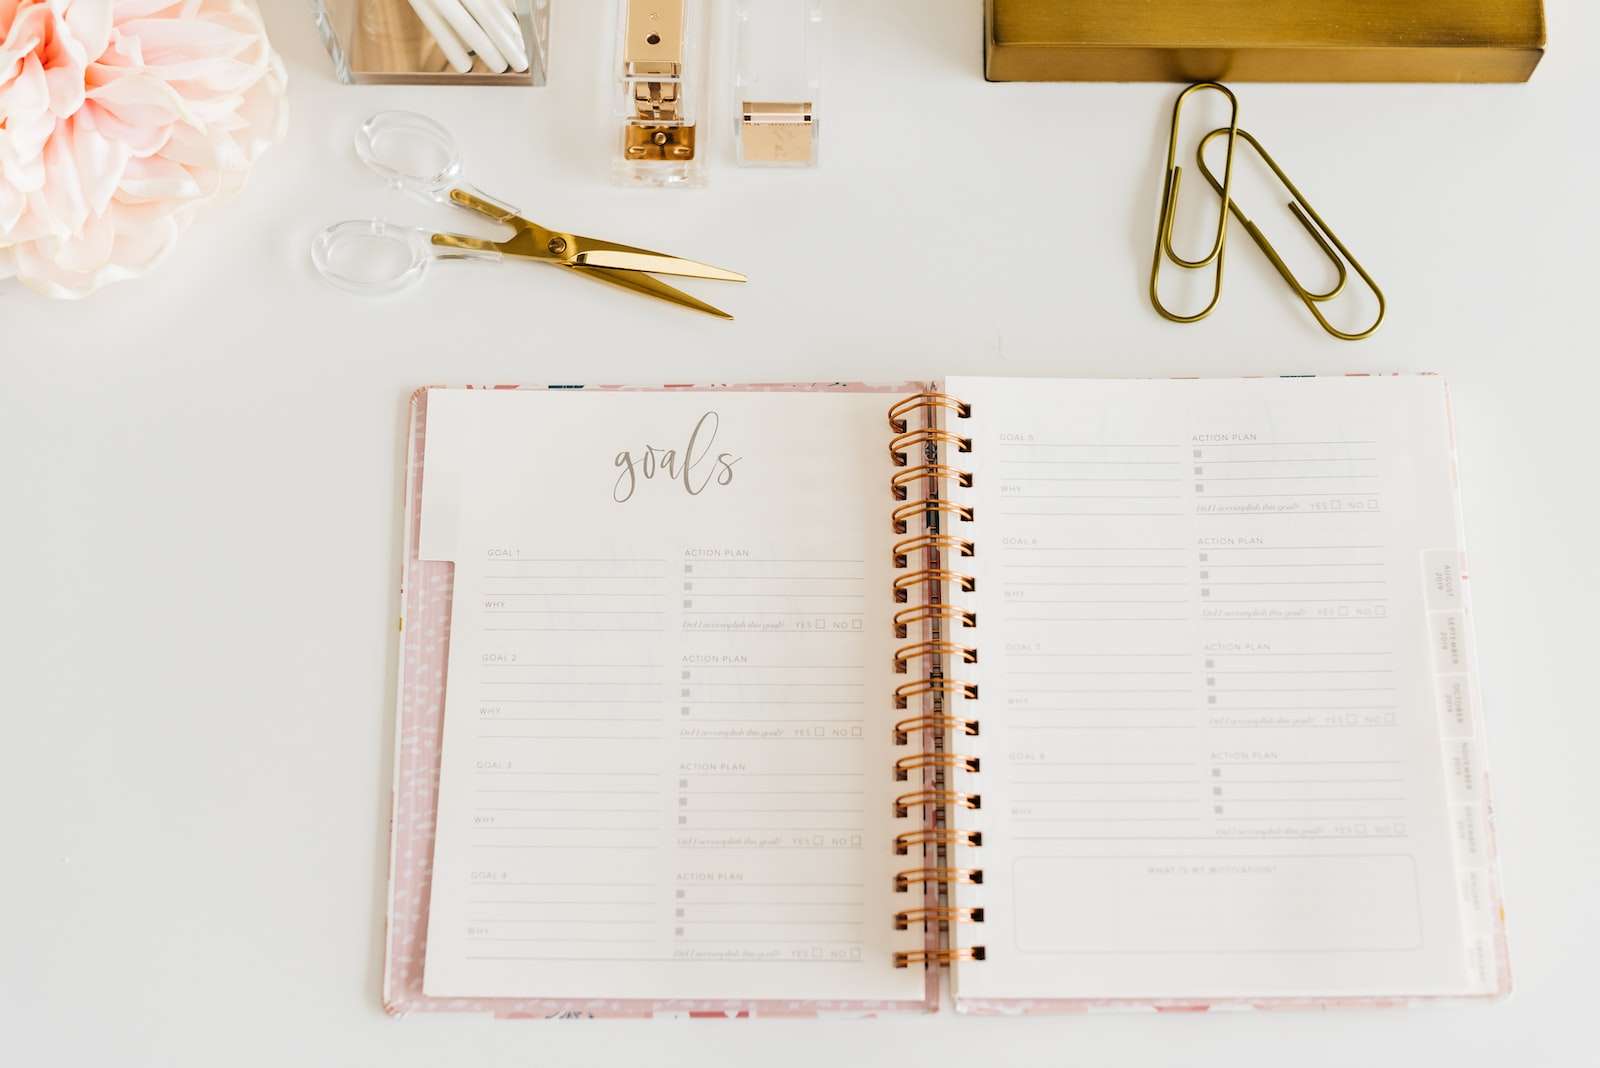 HOW TO MAKE A LIFE PLANNER ON A BUDGET